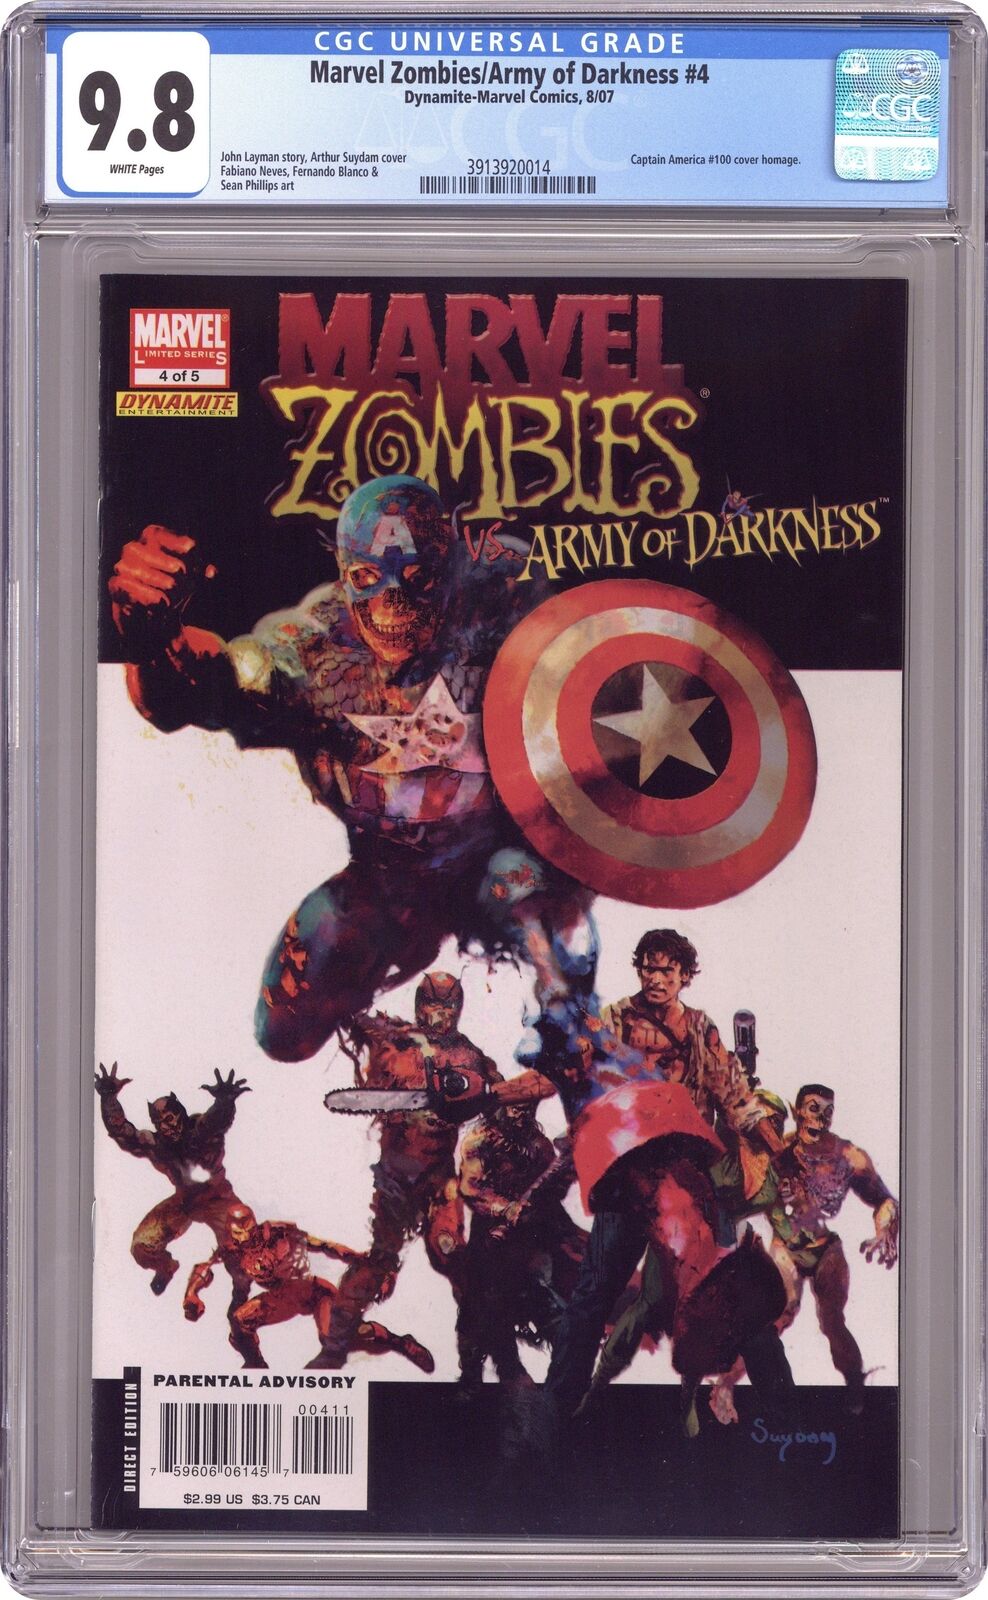 Marvel Zombies Army of Darkness #4 CGC 9.8 2007 3913920014